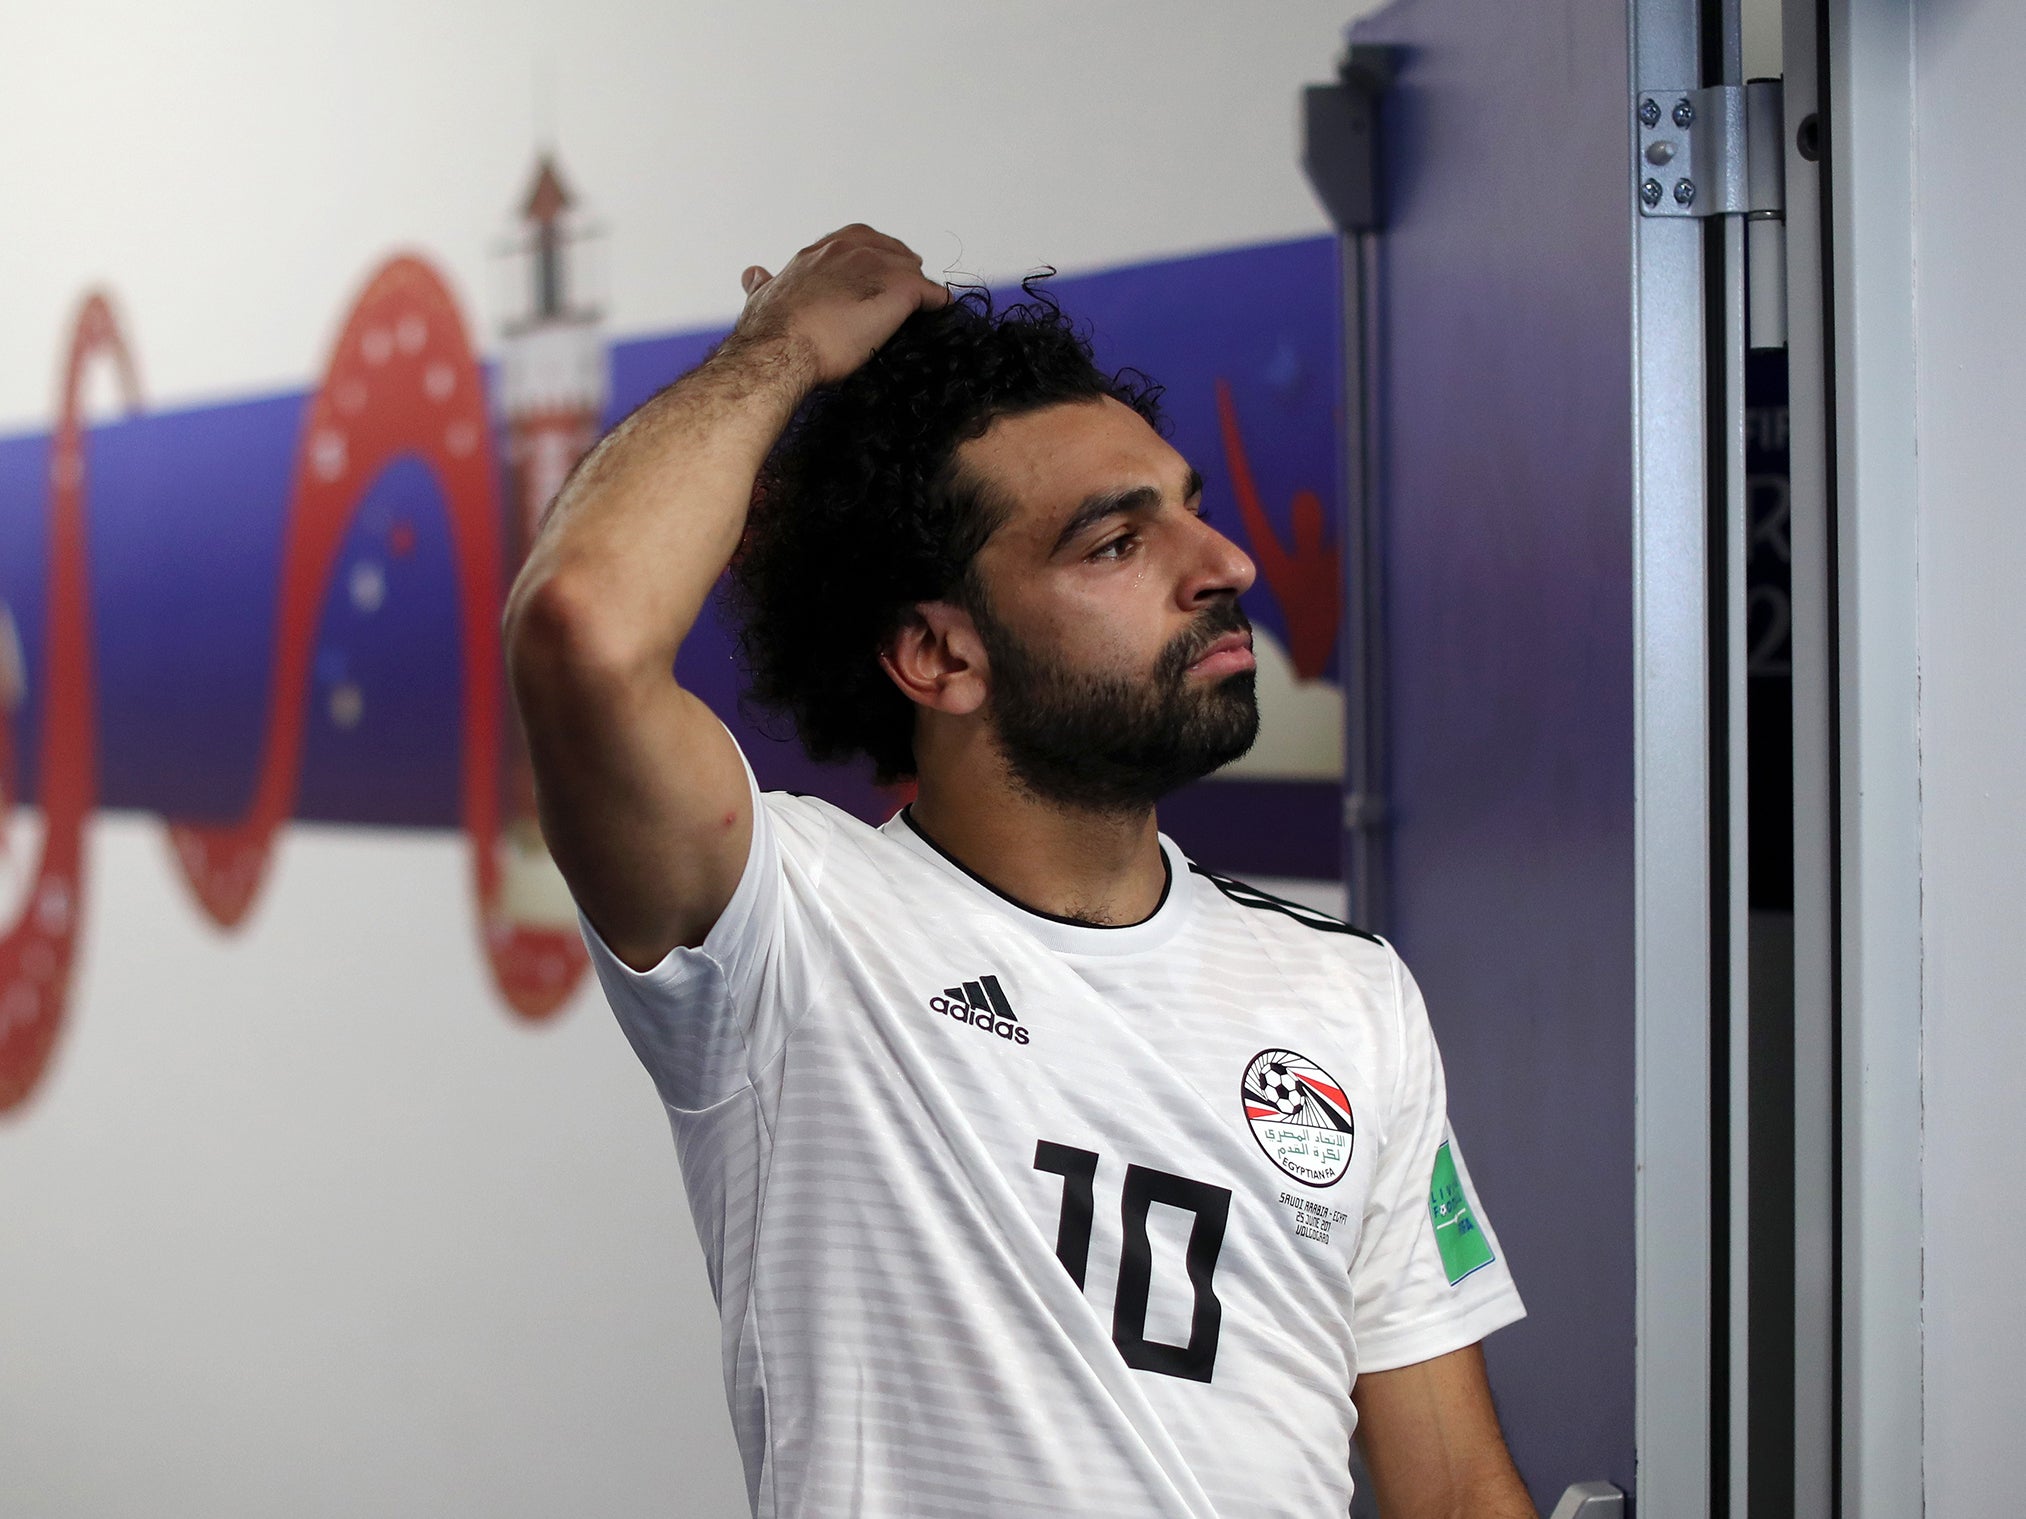 Will Mohamed Salah now walk out the door?